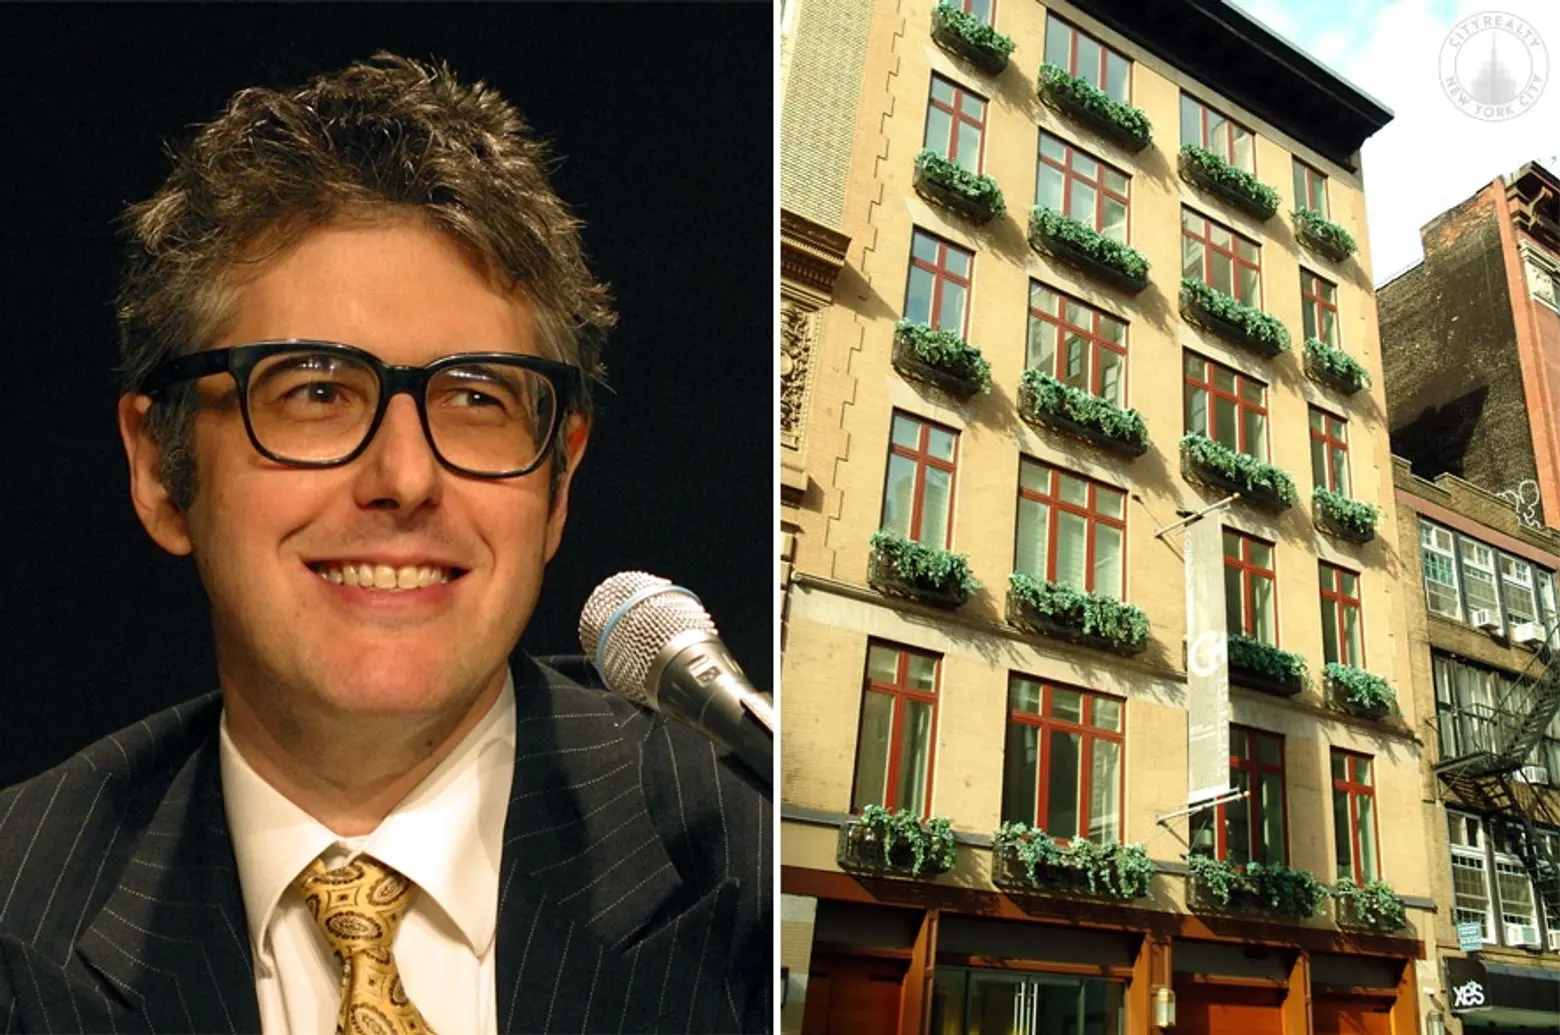 ‘This American Life’ host Ira Glass sued by condo board for harboring rats and bedbugs